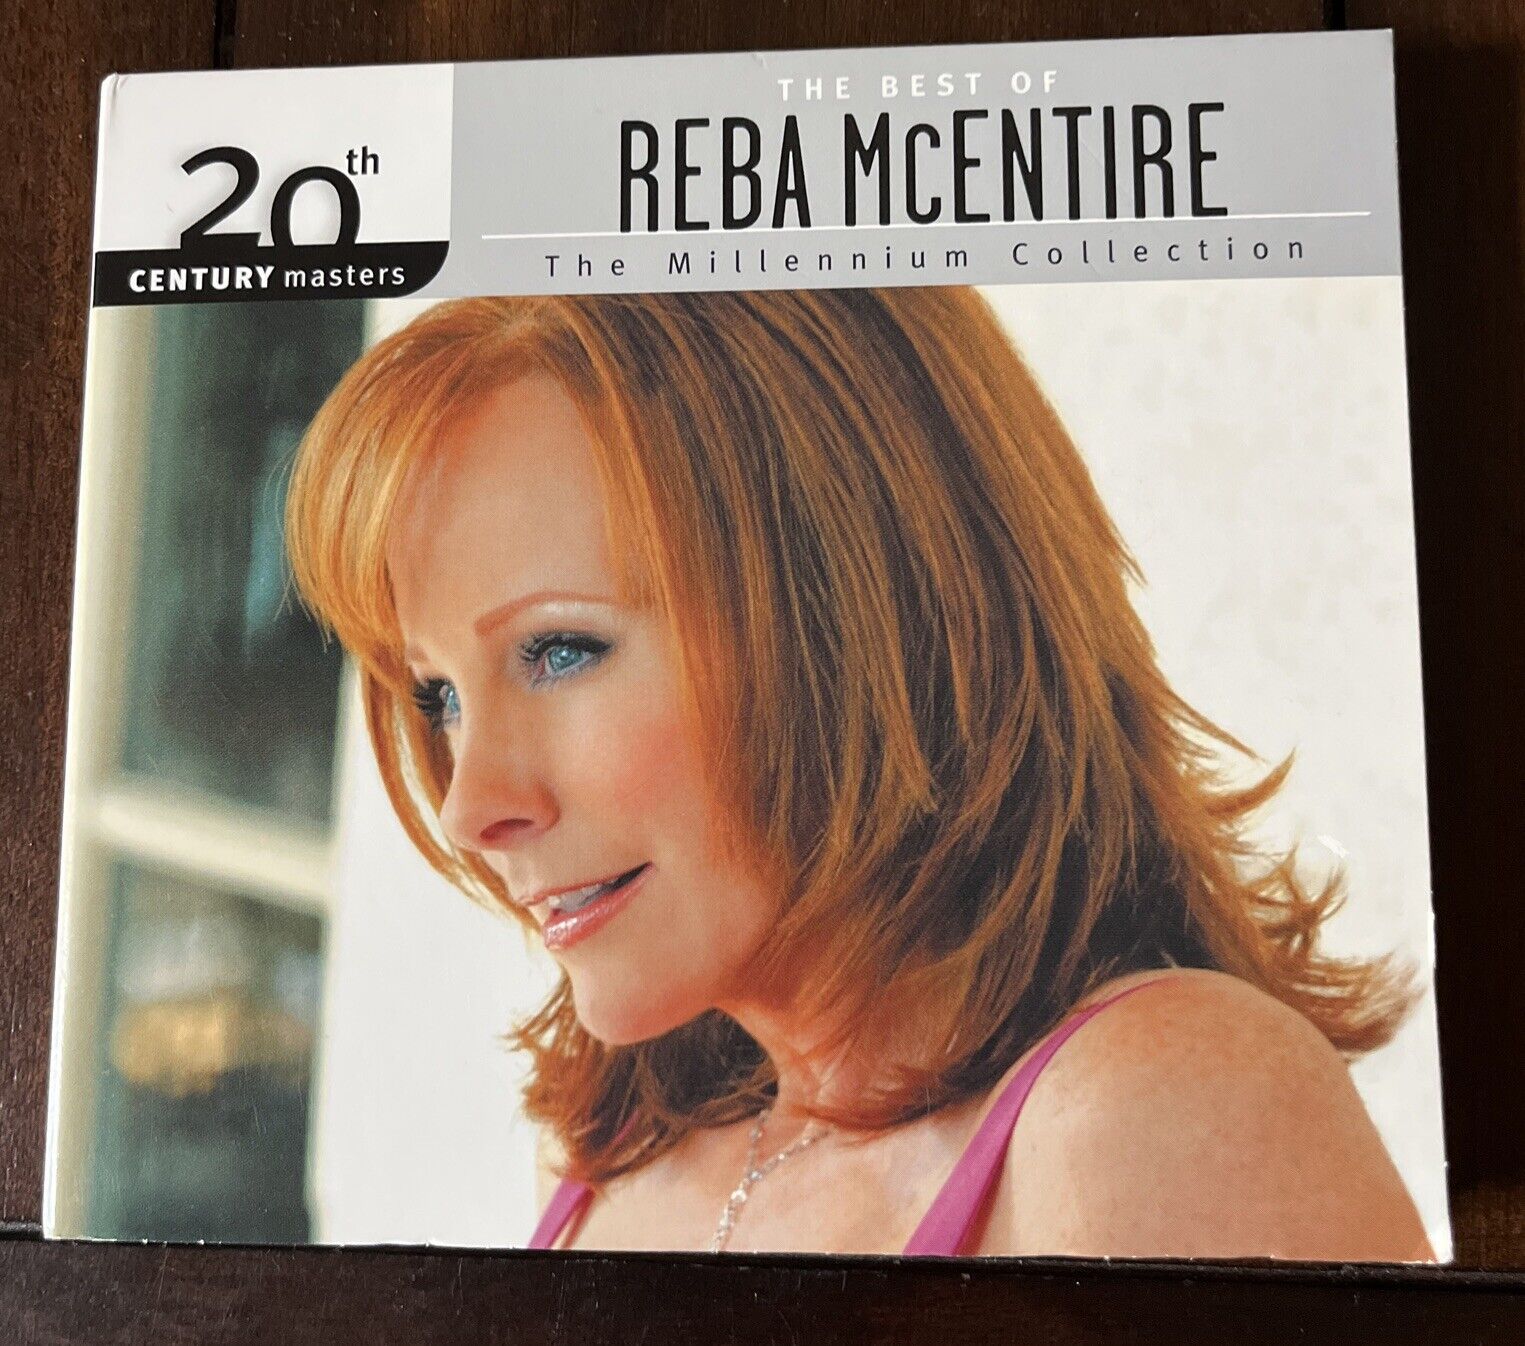 "The Best of Reba McEntire - The Millennium Collection" - MCA CD, Country 2006